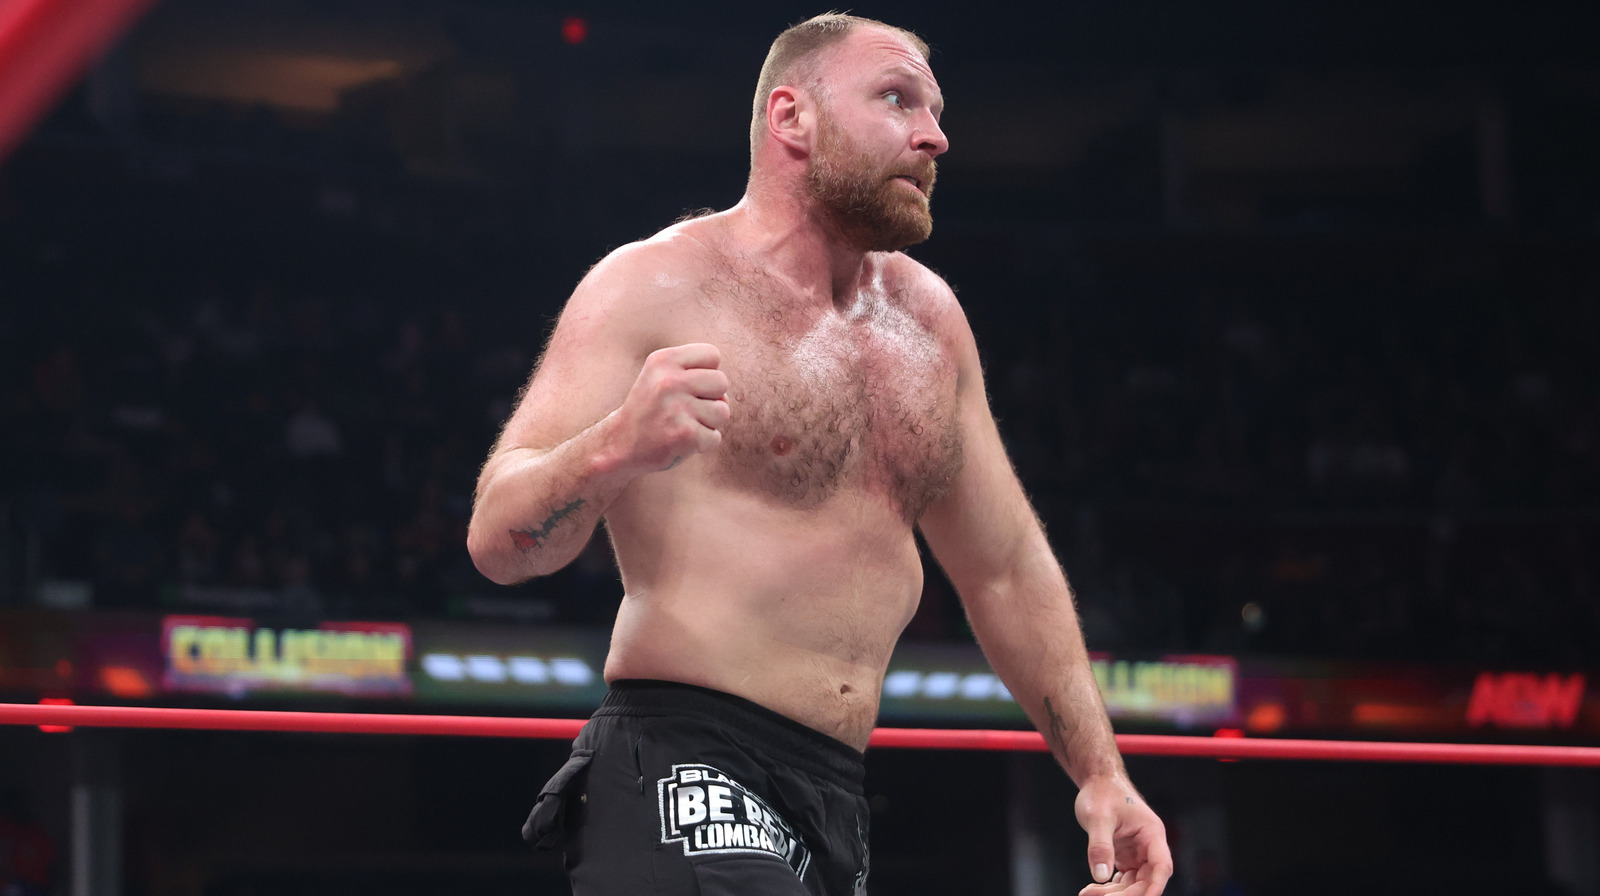 12 Professional Wrestlers Who Made the Jump to Mixed Martial Arts